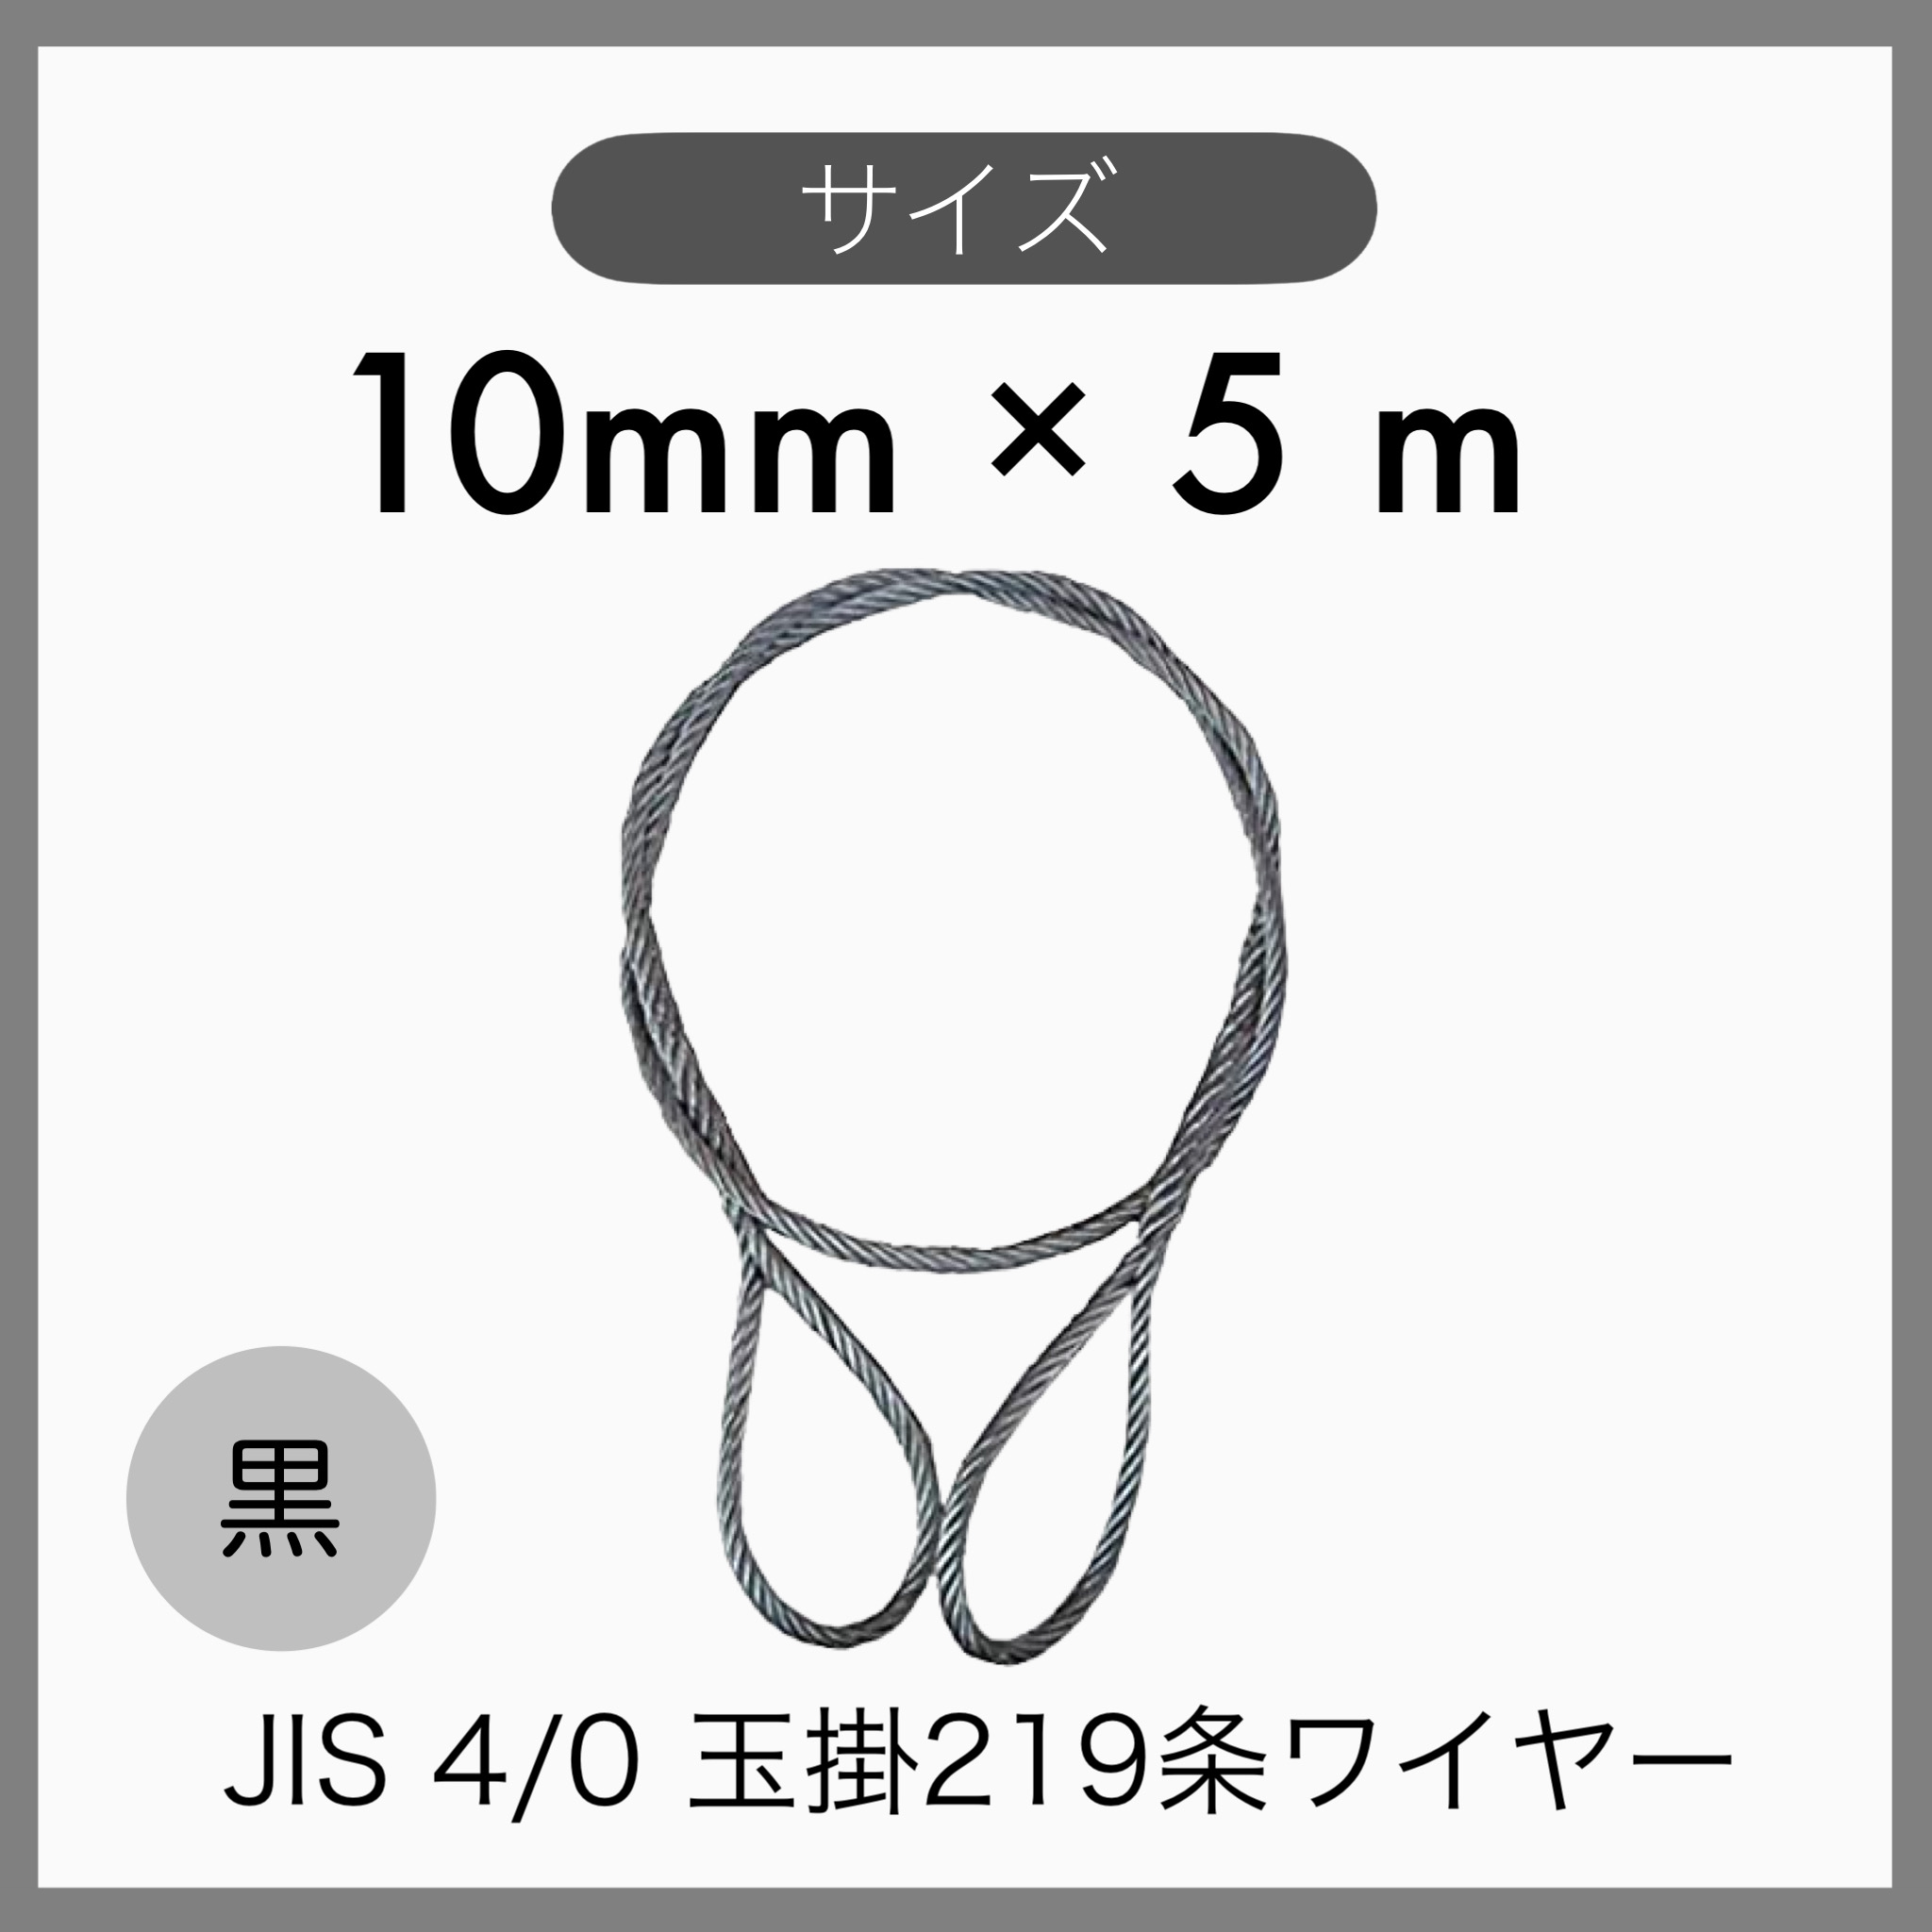 10 pcs set JIS O/O black sphere .. wire sphere ..219 article wire knitting imported goods 10mm×5m